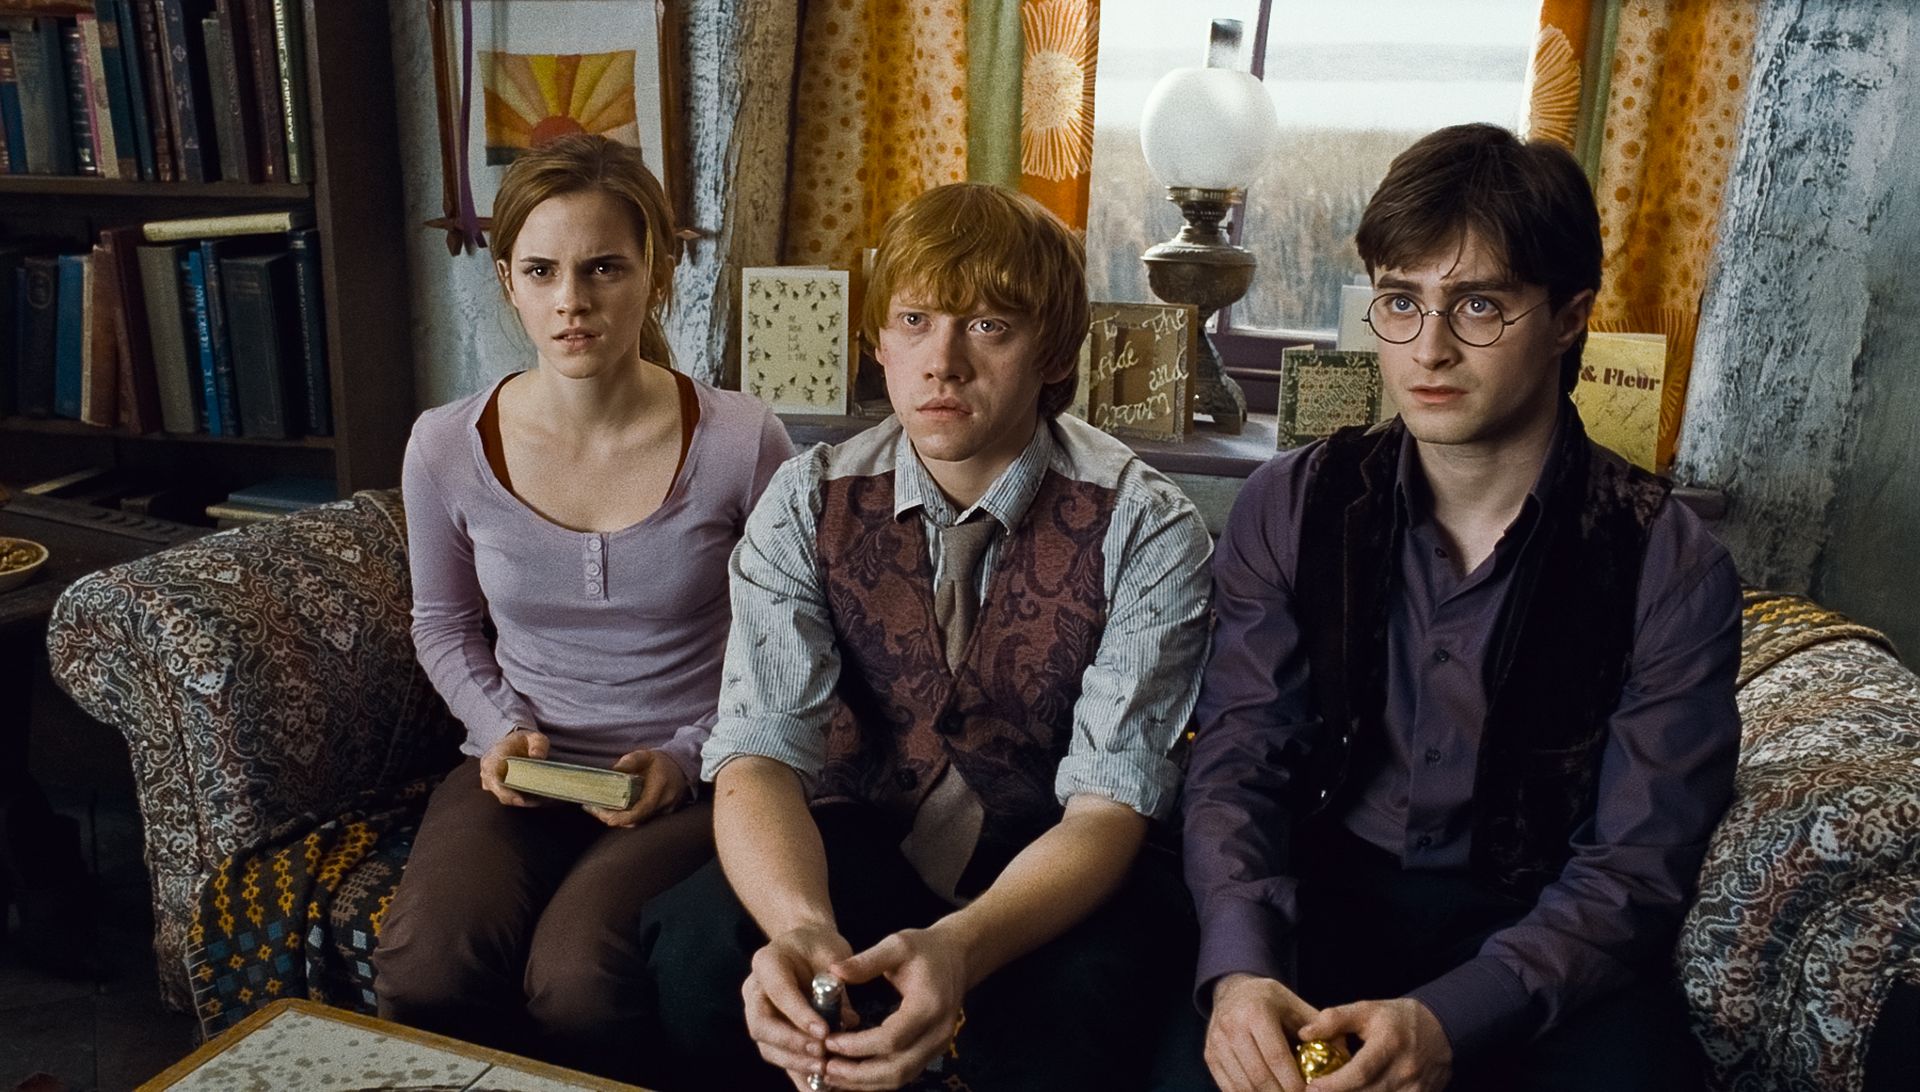 Emma Watson, Rupert Grint and Daniel Radcliffe as Hermione, Ron and Harry